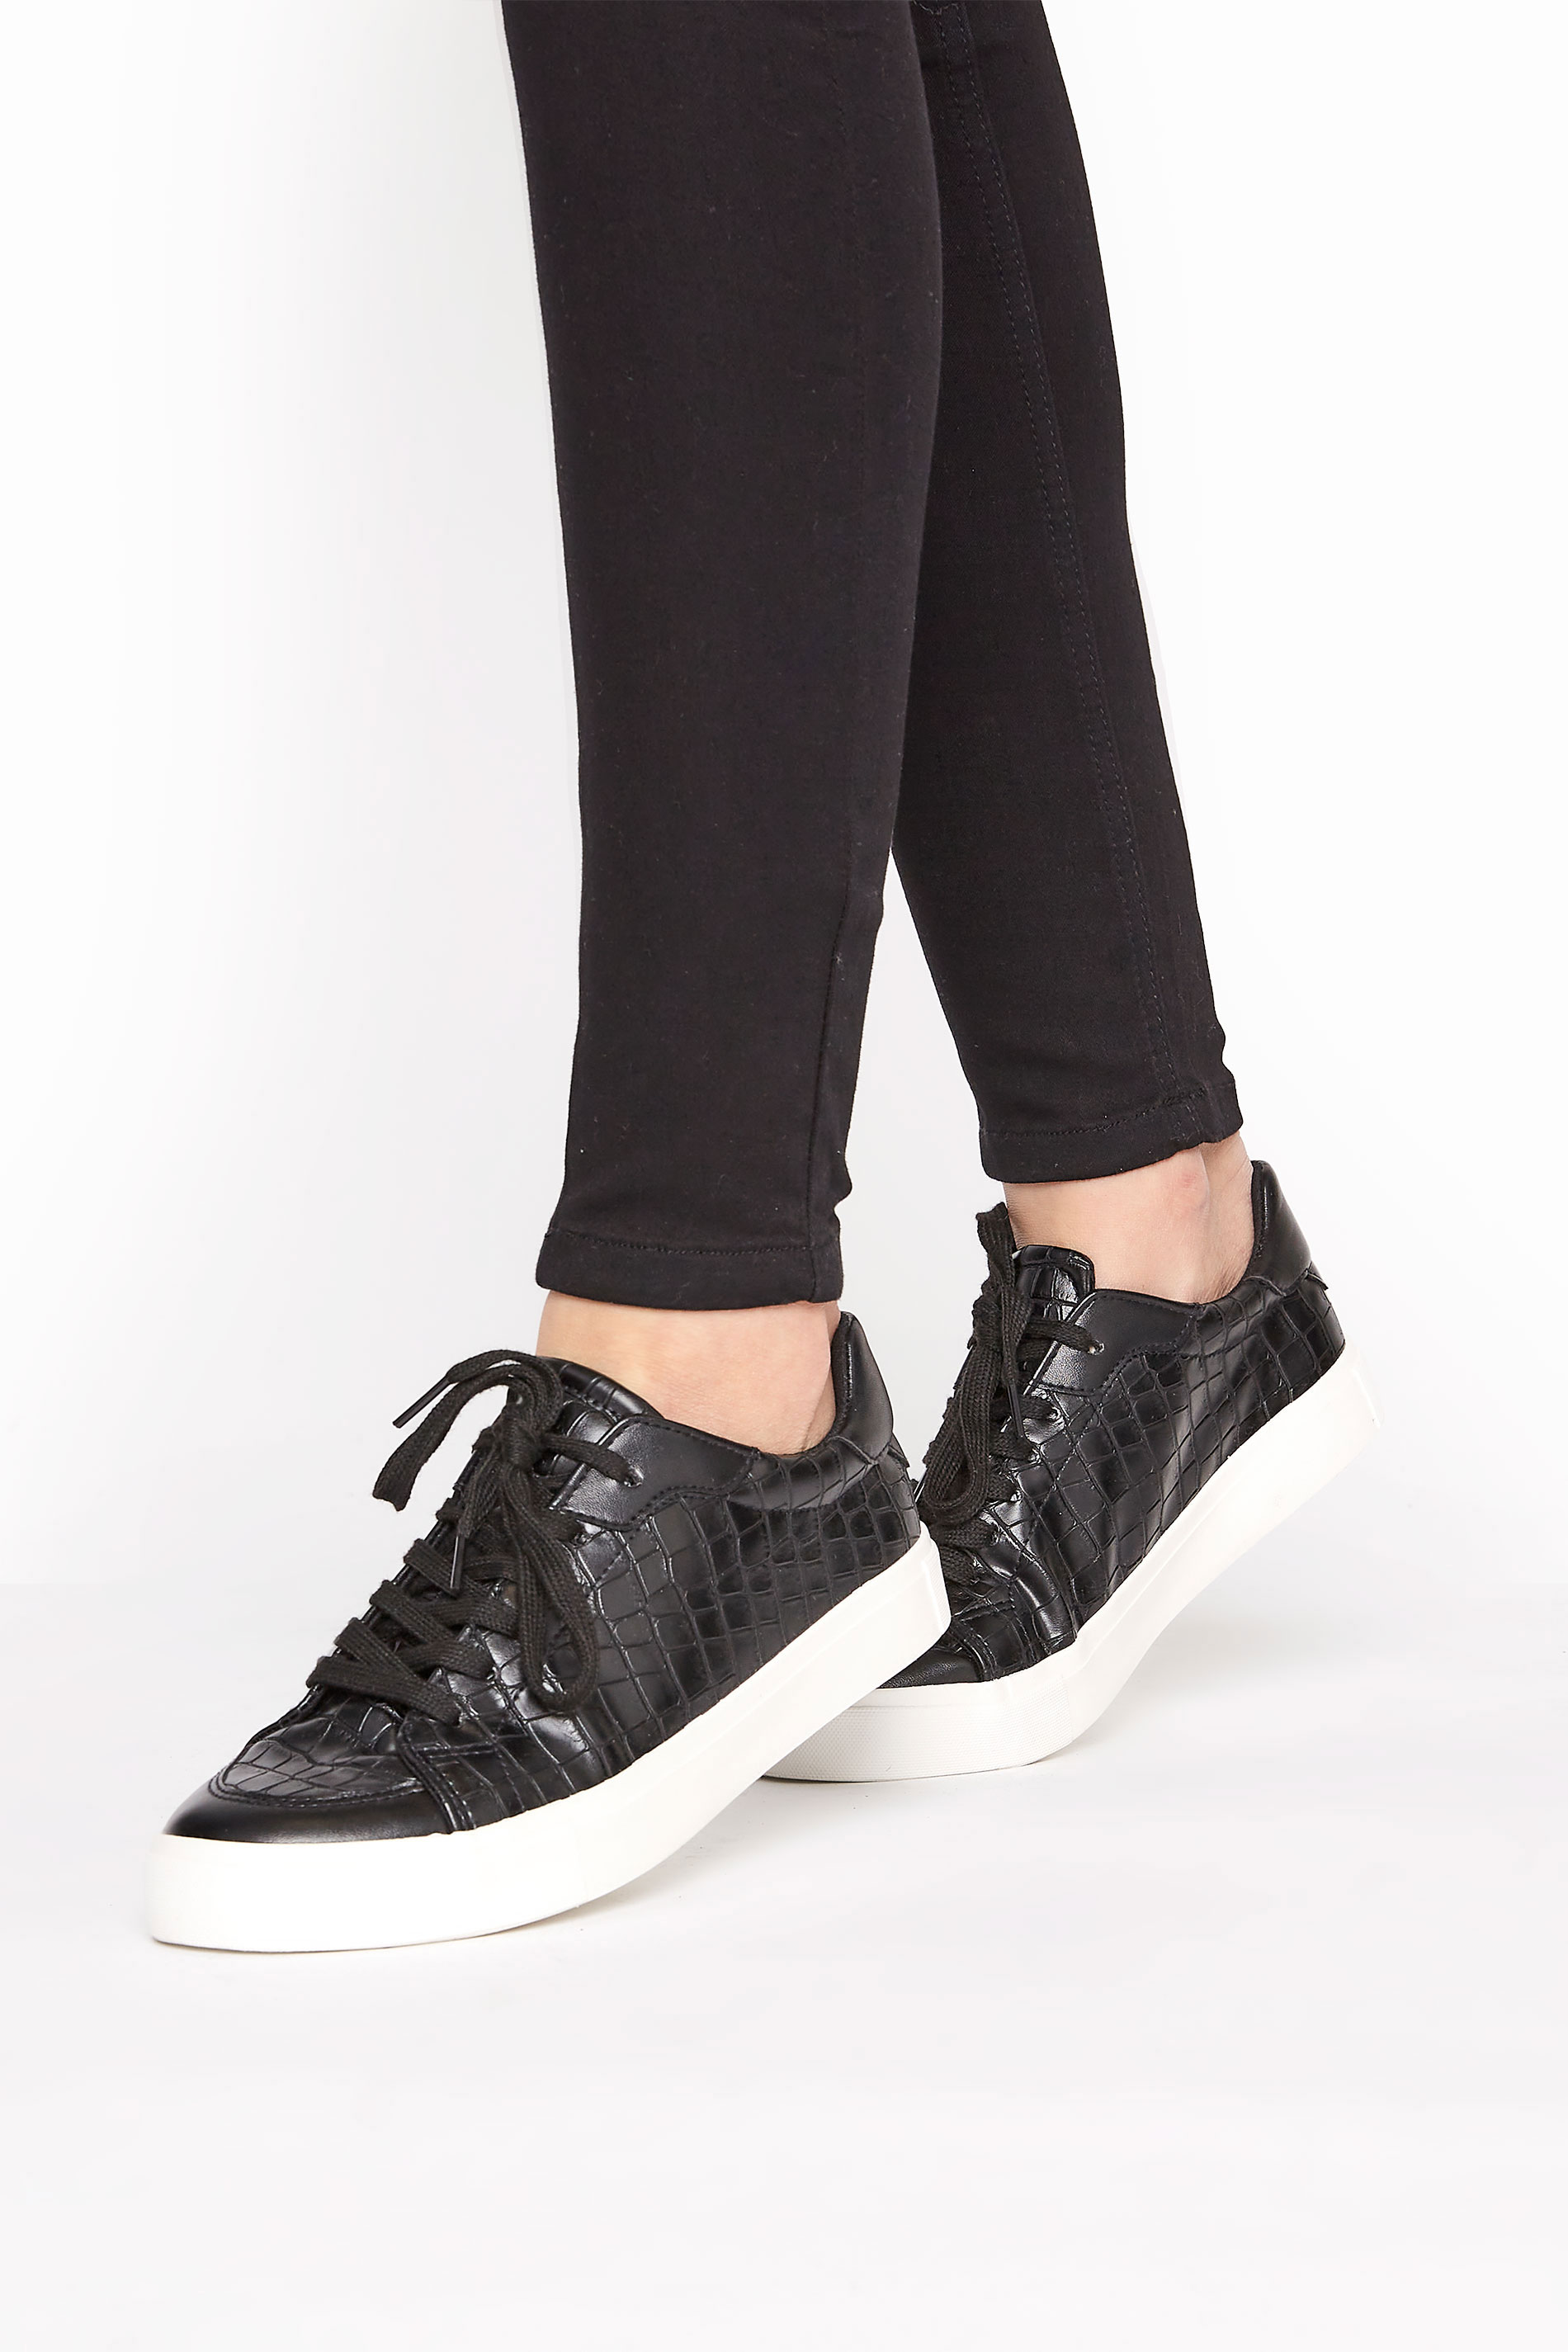 LTS Black Croc Lace Up Trainers In Standard Fit | Long Tall Sally  1